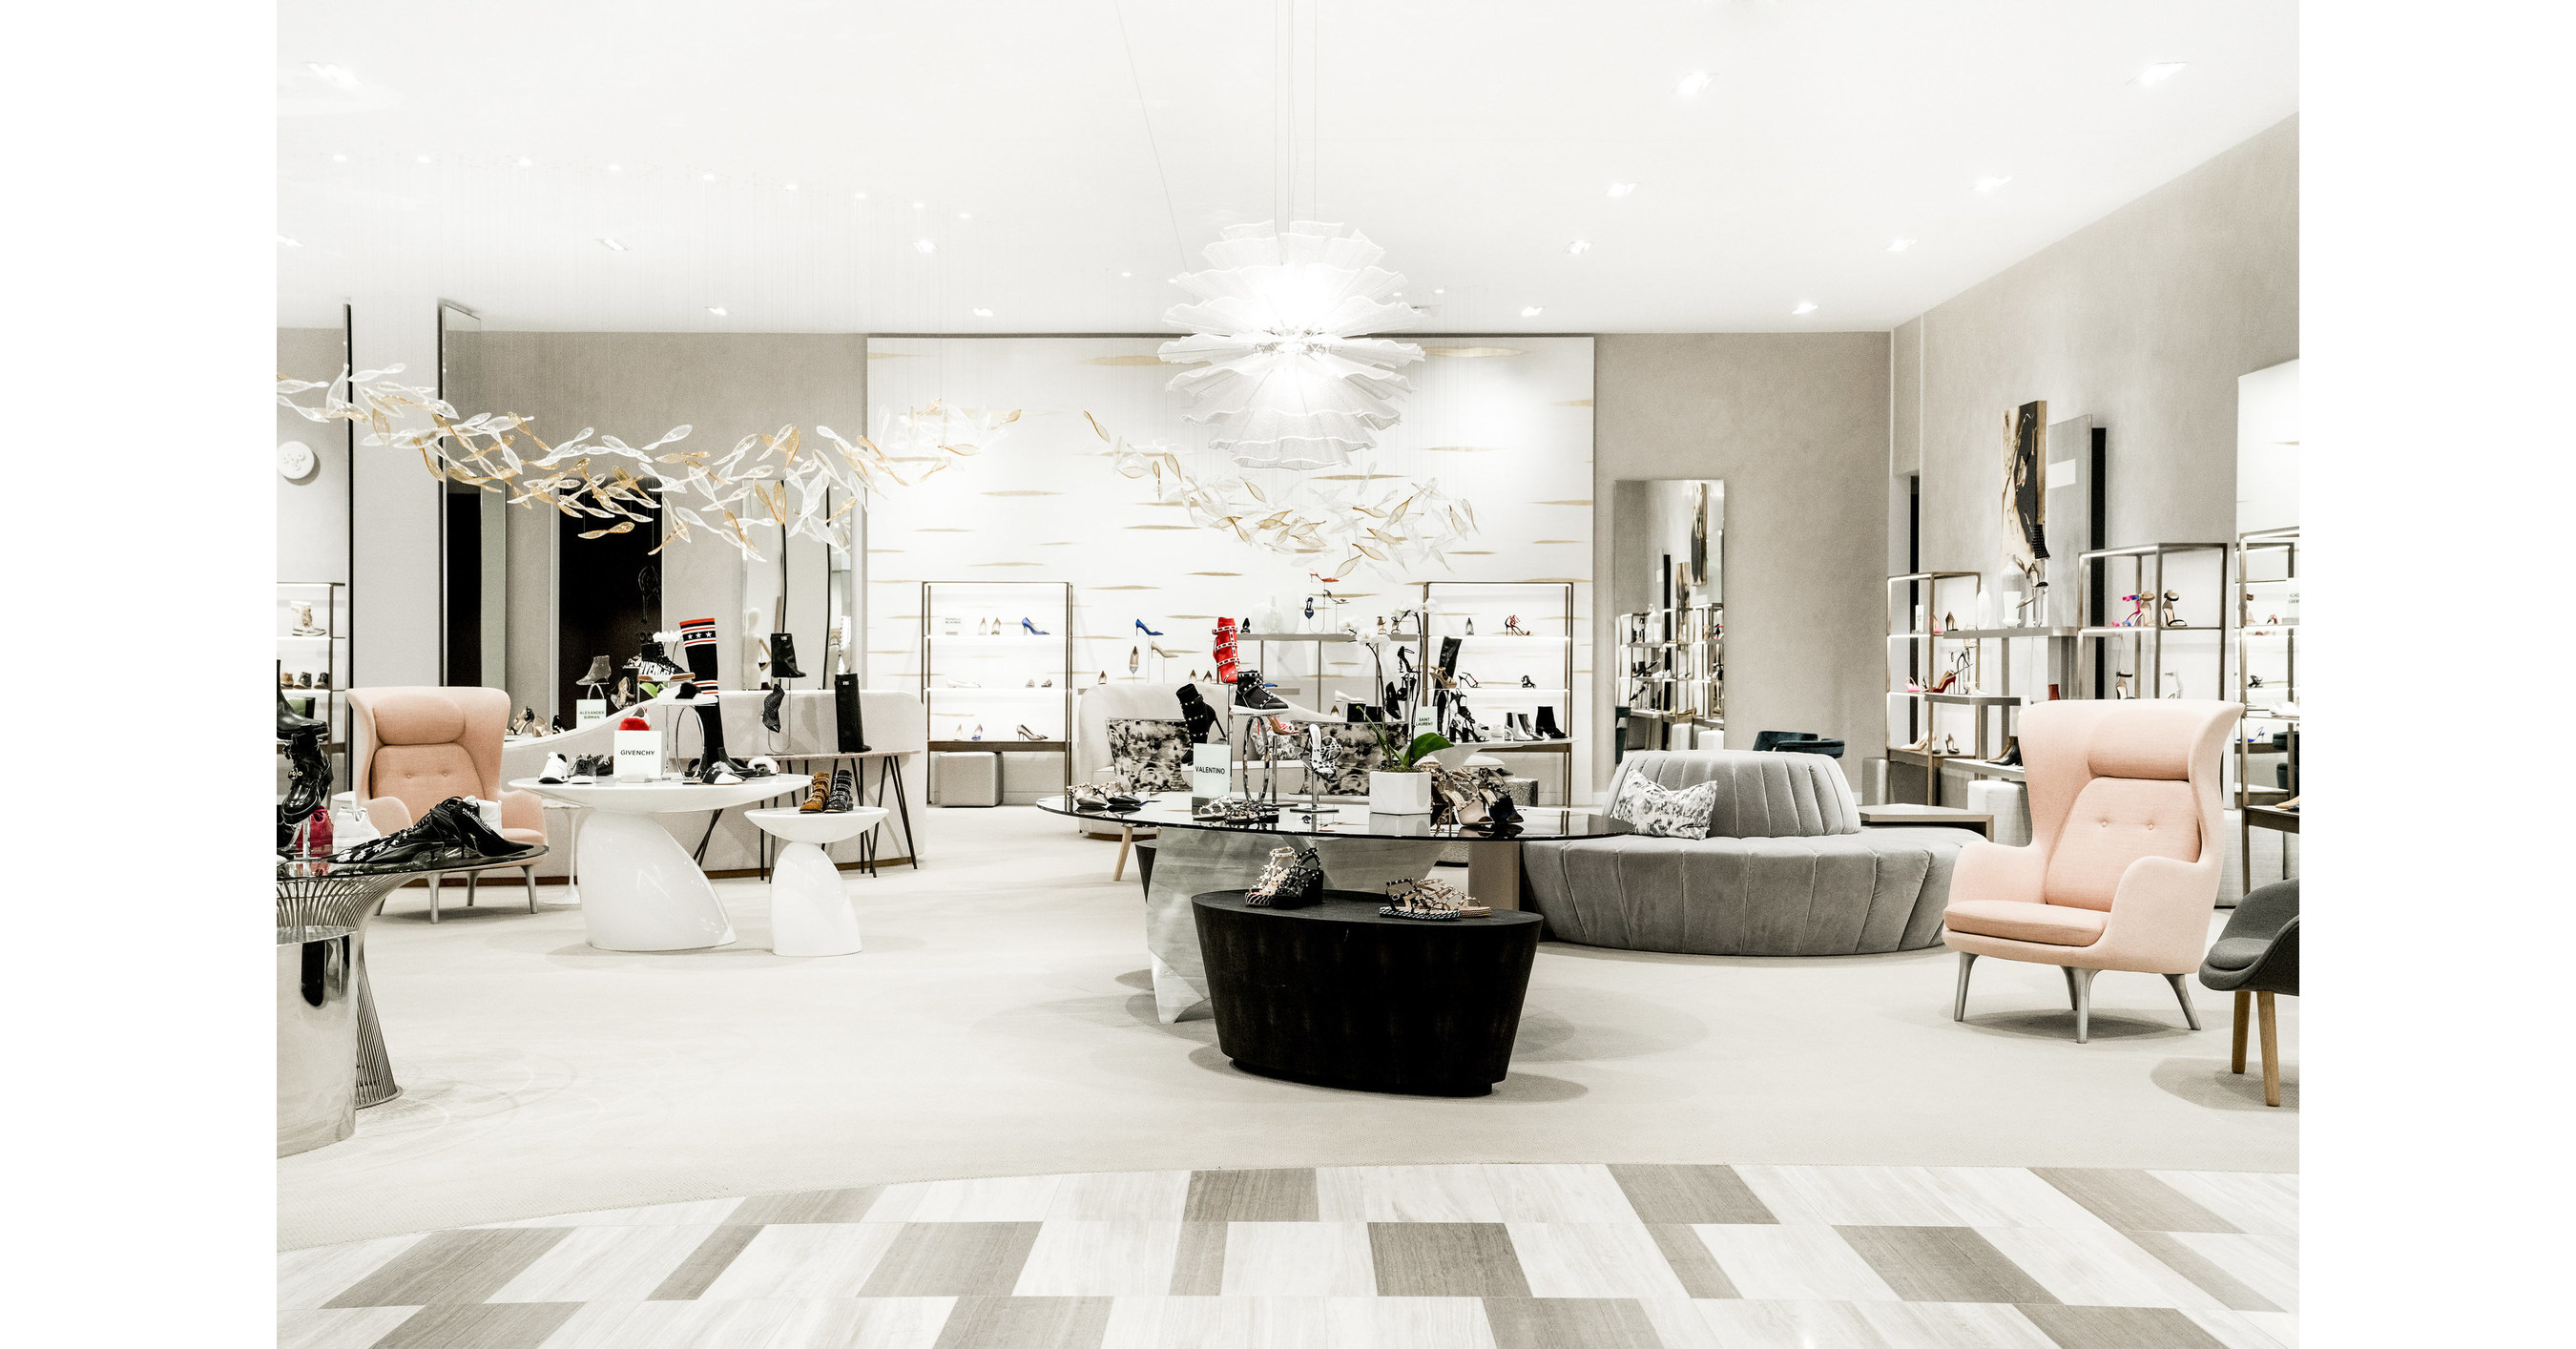 Saks Fifth Avenue Canada Opening